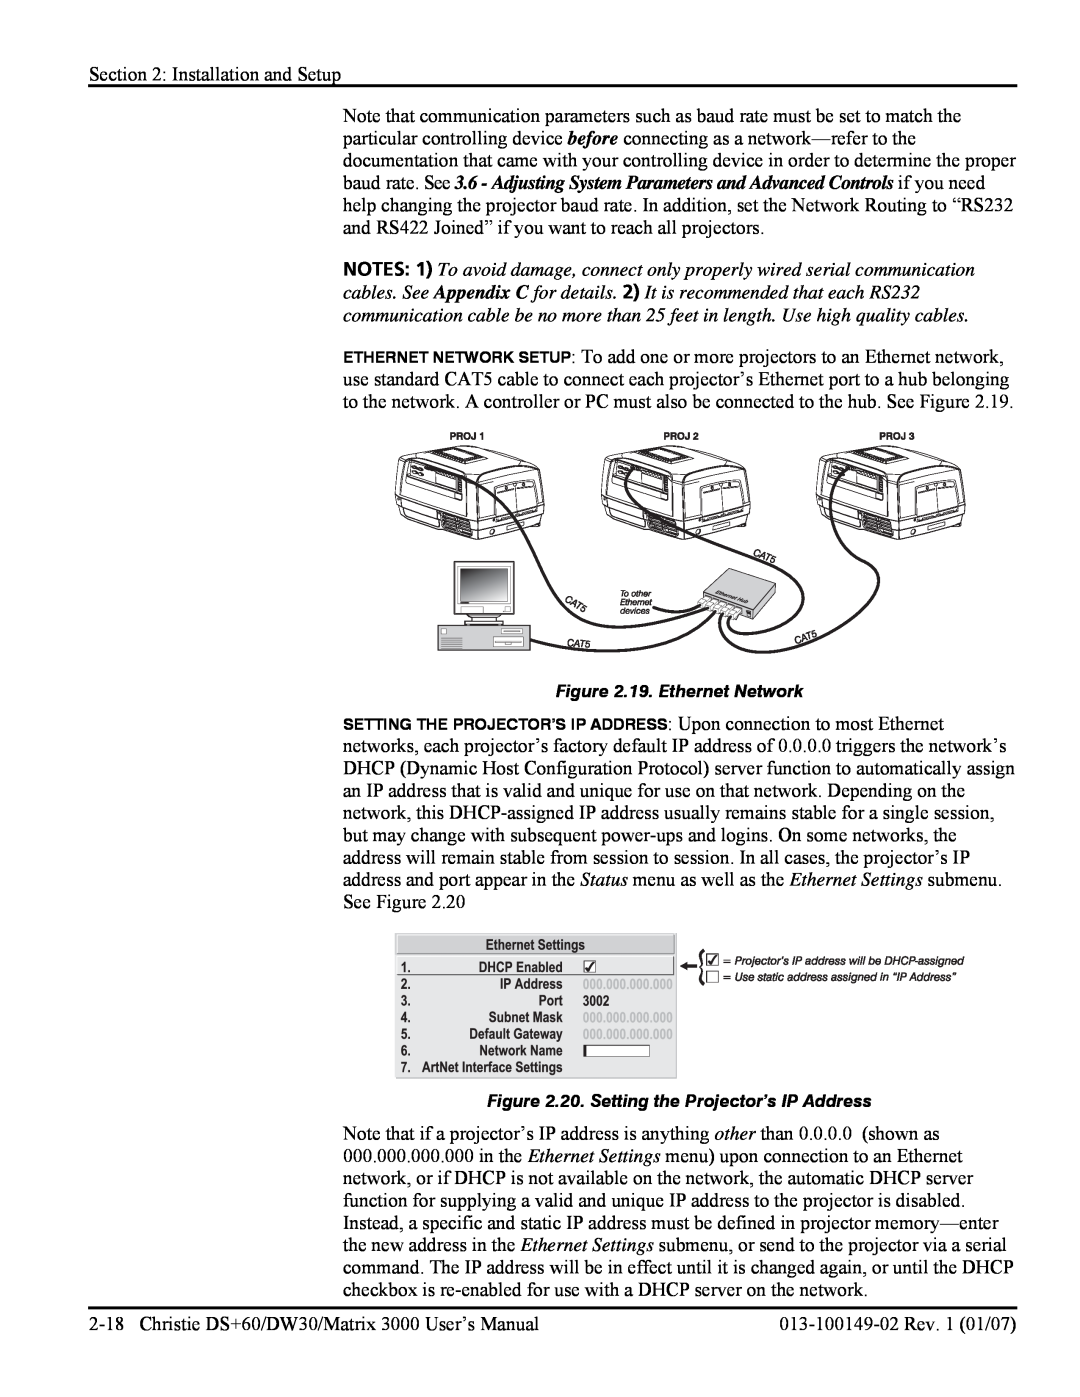 Texas Instruments DW30, MATRIX 3000 user manual 19. Ethernet Network, 20. Setting the Projector’s IP Address 